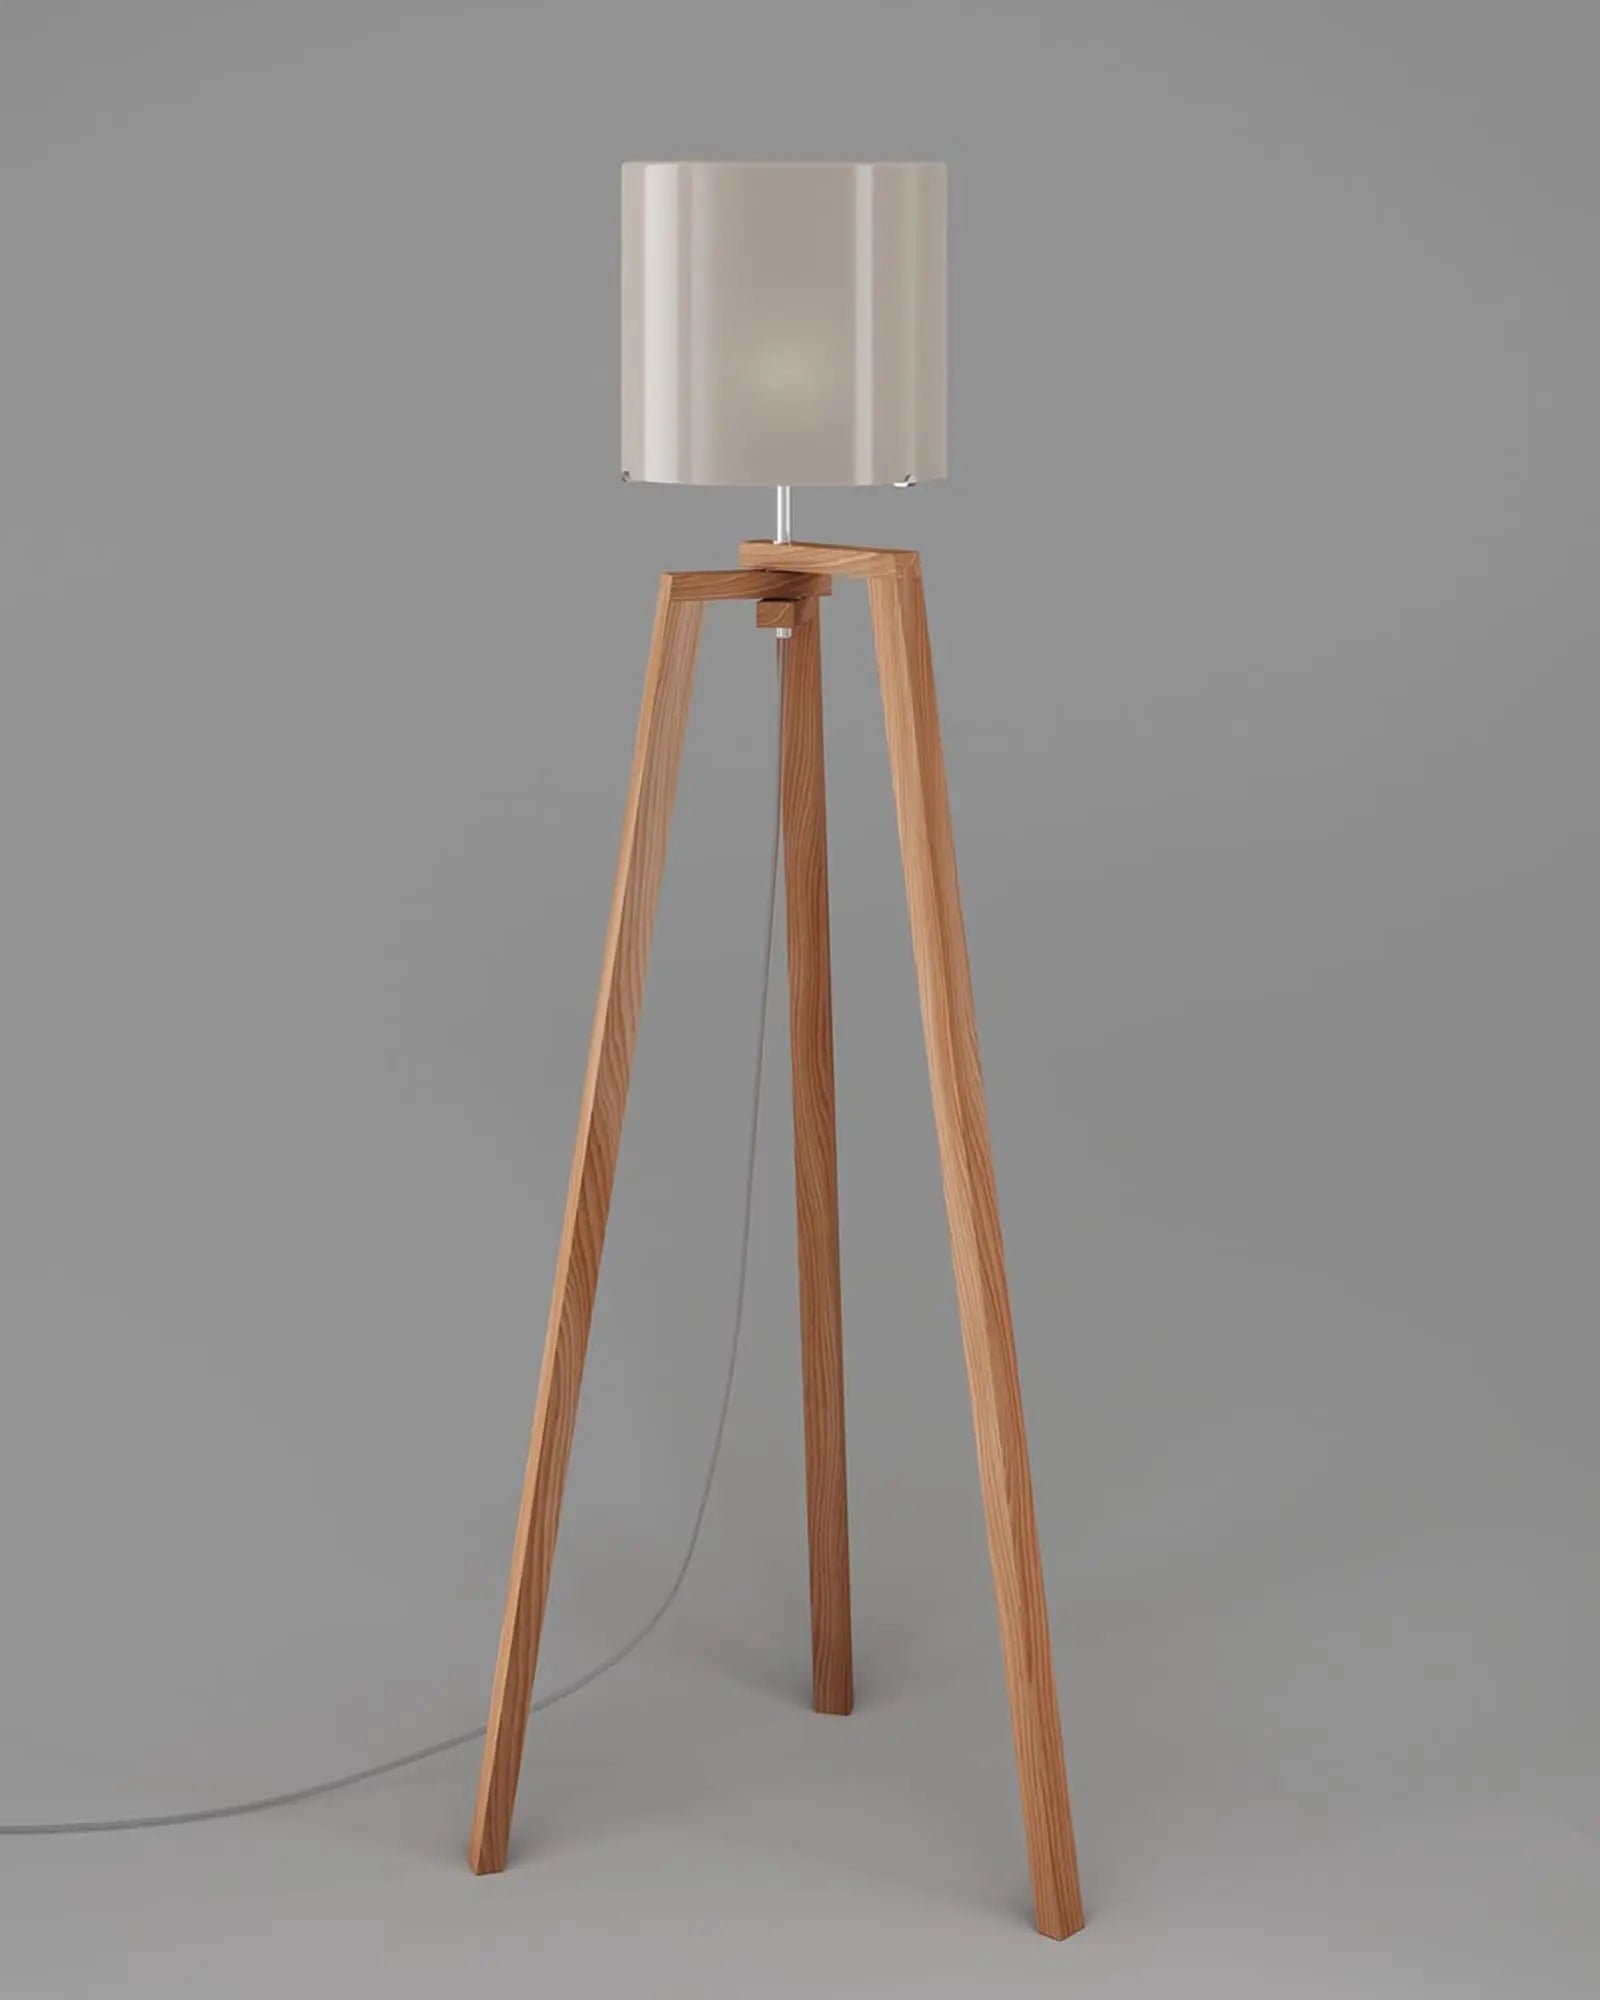 Trepai timber and glass contemporary floor lamp